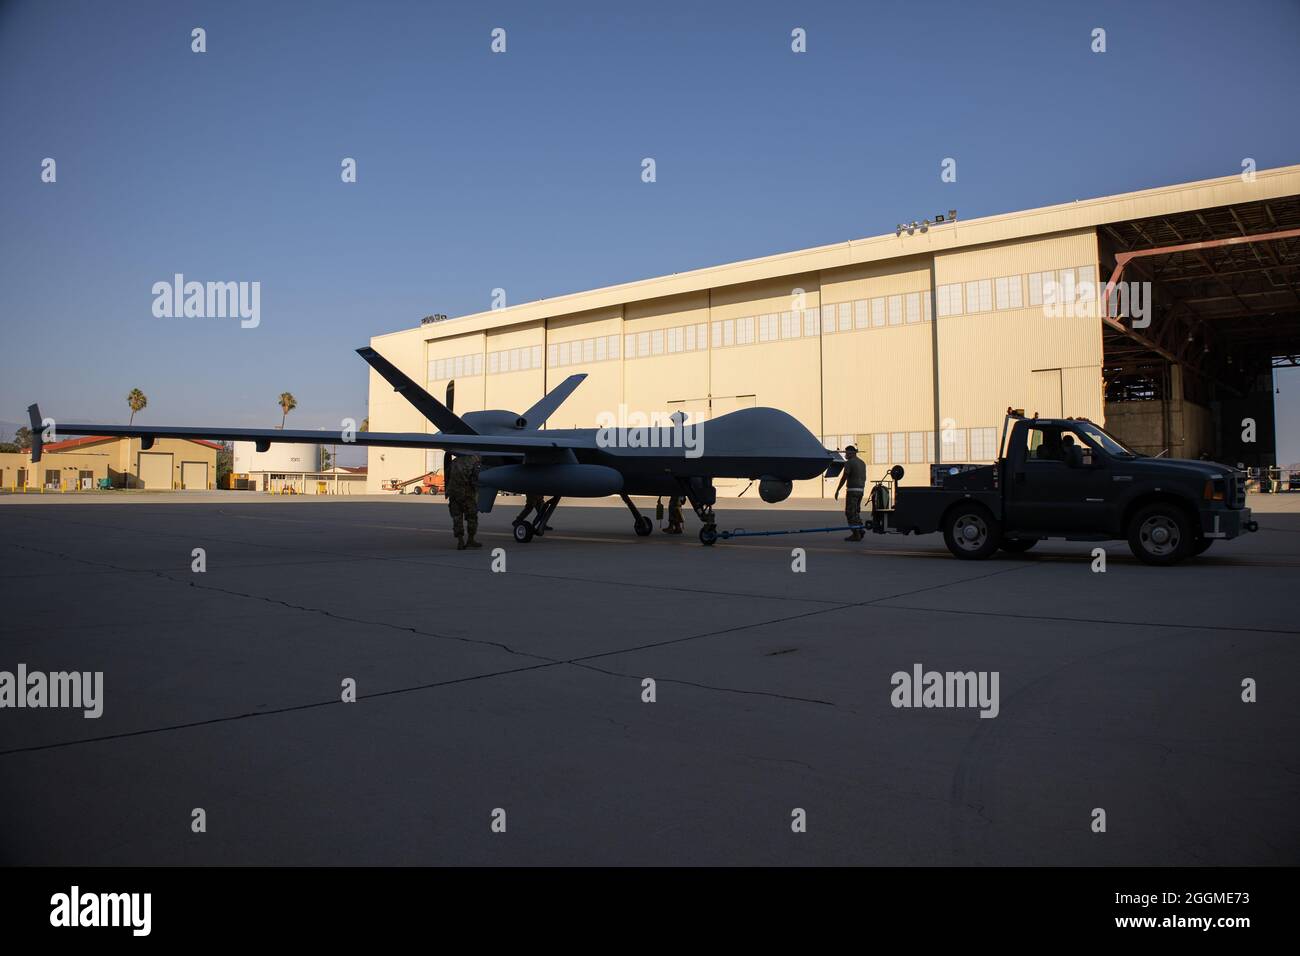 A U.S. Air Force MQ-9 Reaper remotely piloted aircraft assigned to the California Air National Guard’s 163d Attack Wing is towed out of the hangar, Aug. 9, 2021, at March Air Reserve Base, California, for a flight to map the Dixie Fire burning in northern California. The aircraft provides critical real-time data to firefighters and first responders so they can make informed decisions about how to contain the fire. (U.S. Air National Guard photo by Staff Sgt. Crystal Housman) Stock Photo